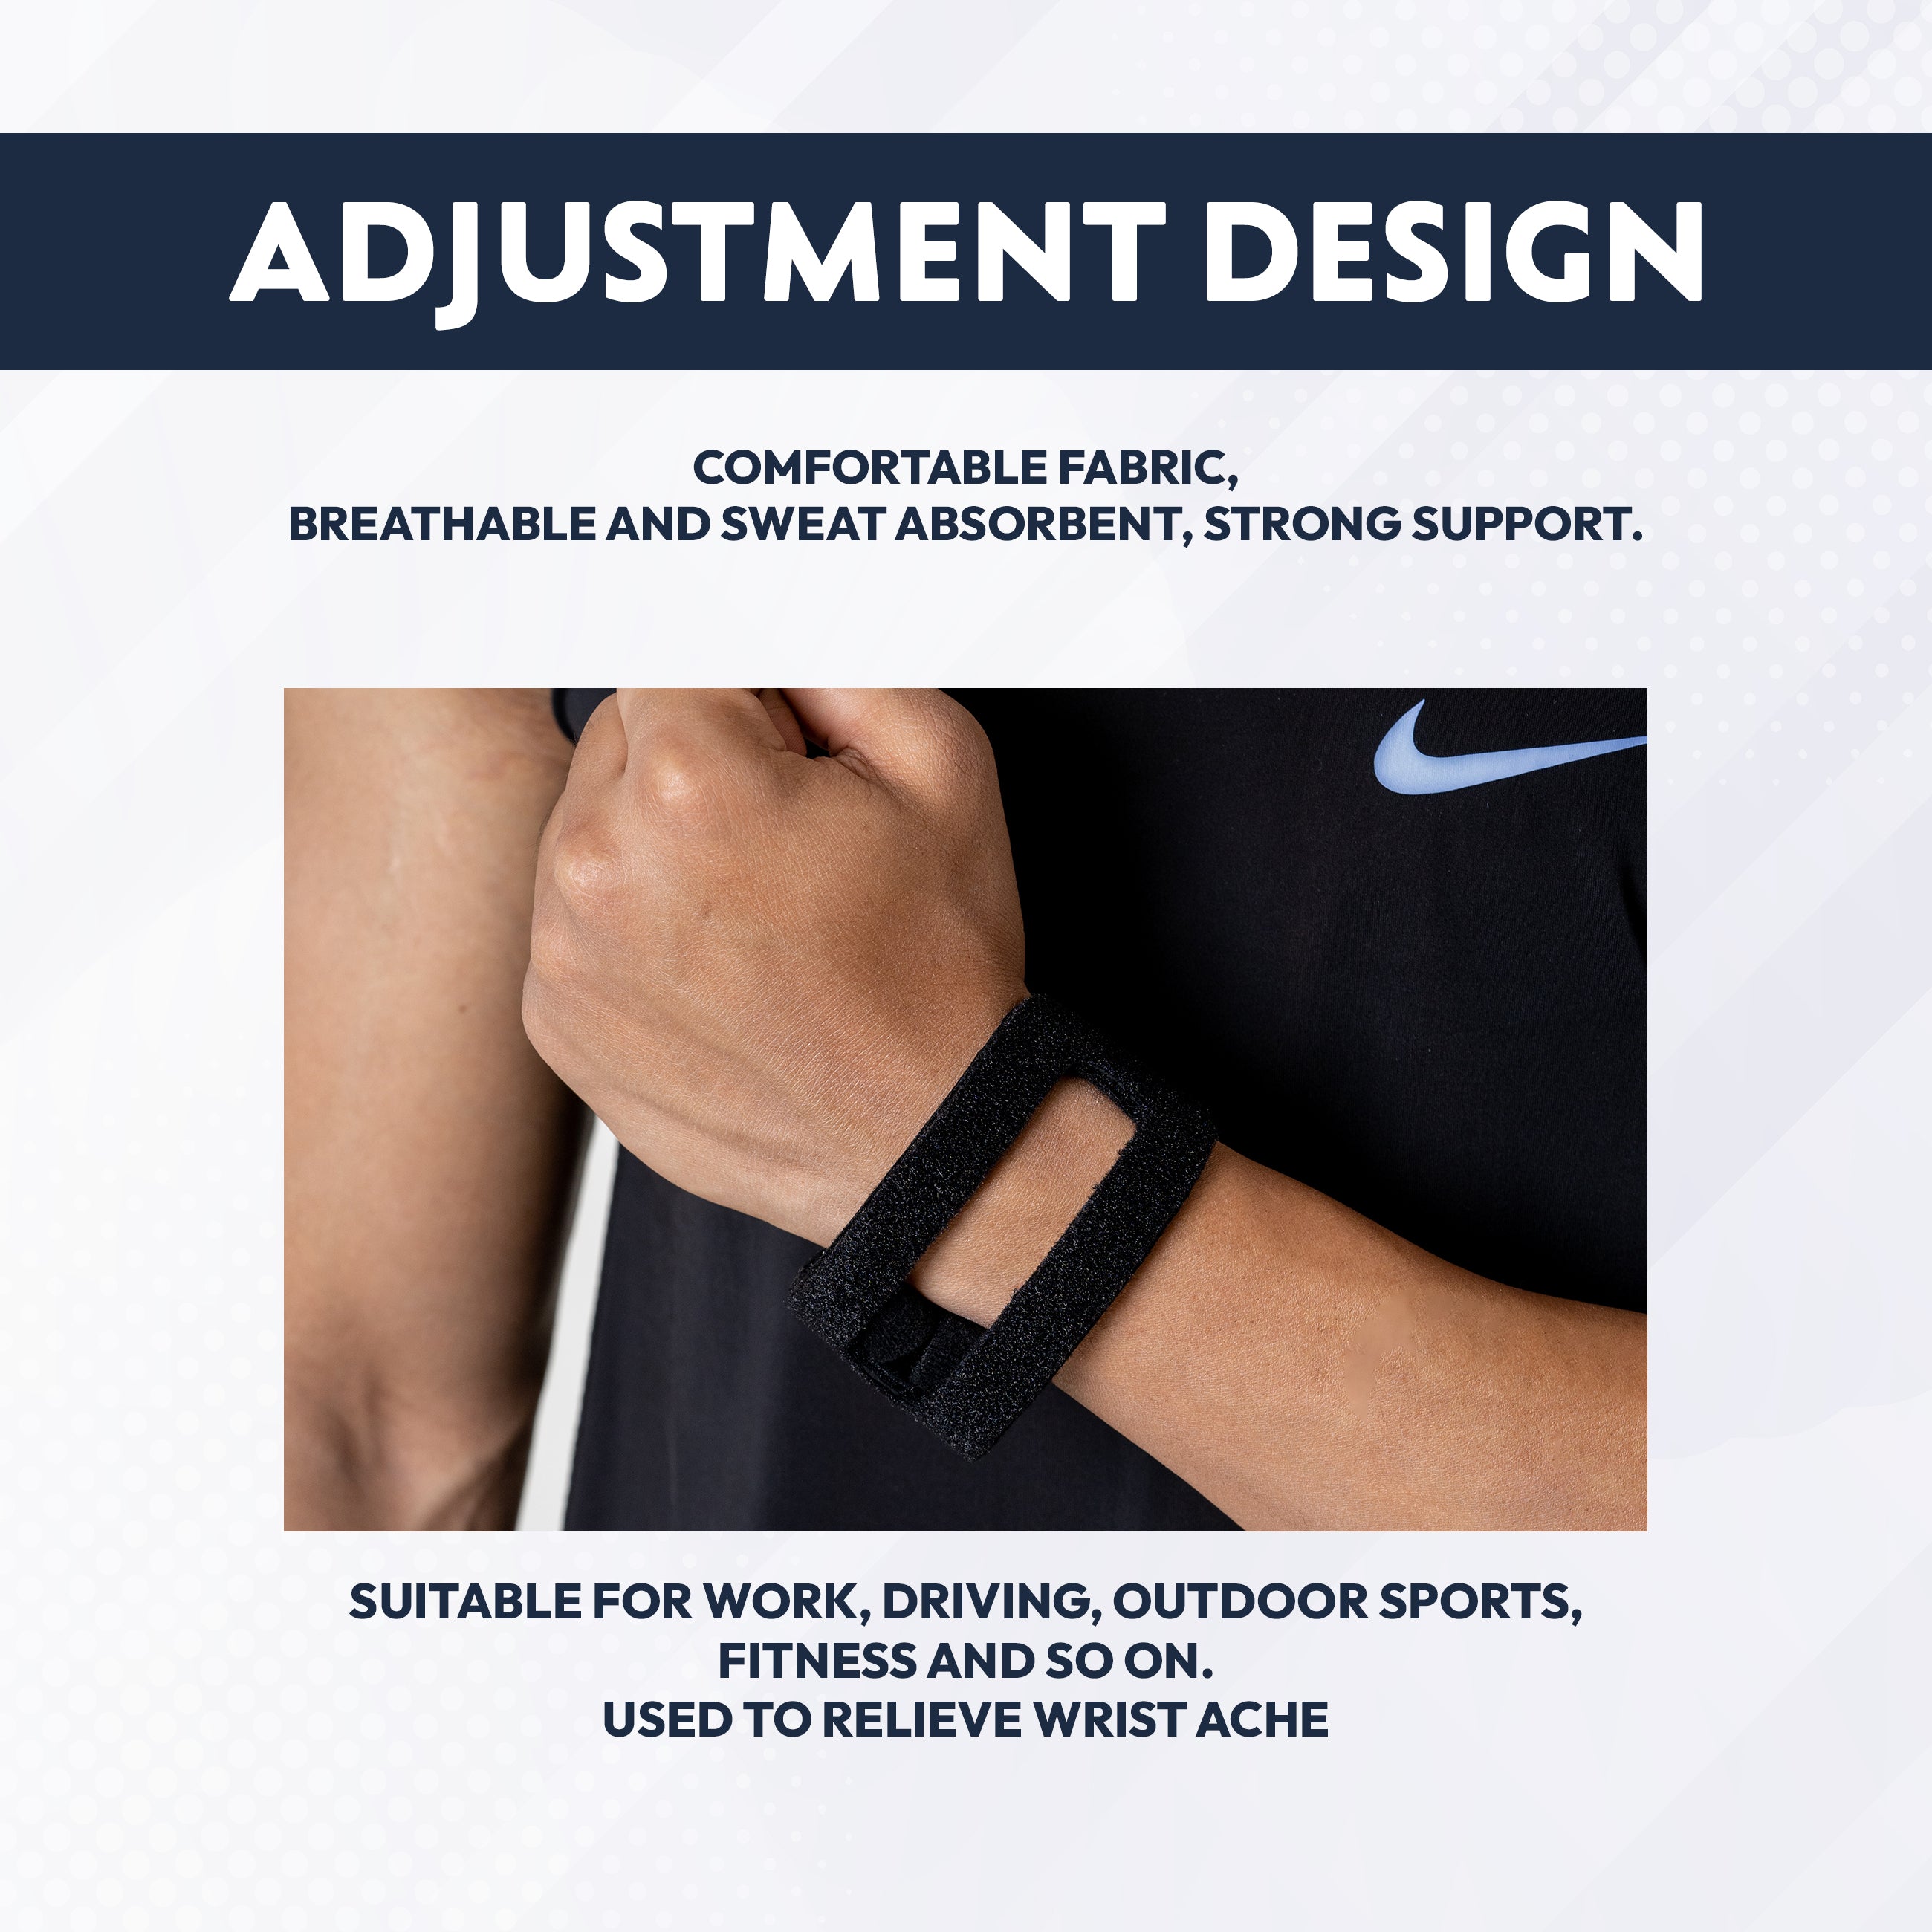 I5Joints-Wrist Support( Enhance Your Workouts and Daily Activities with Comfort and Stability. Say Goodbye to Aches and Strains)